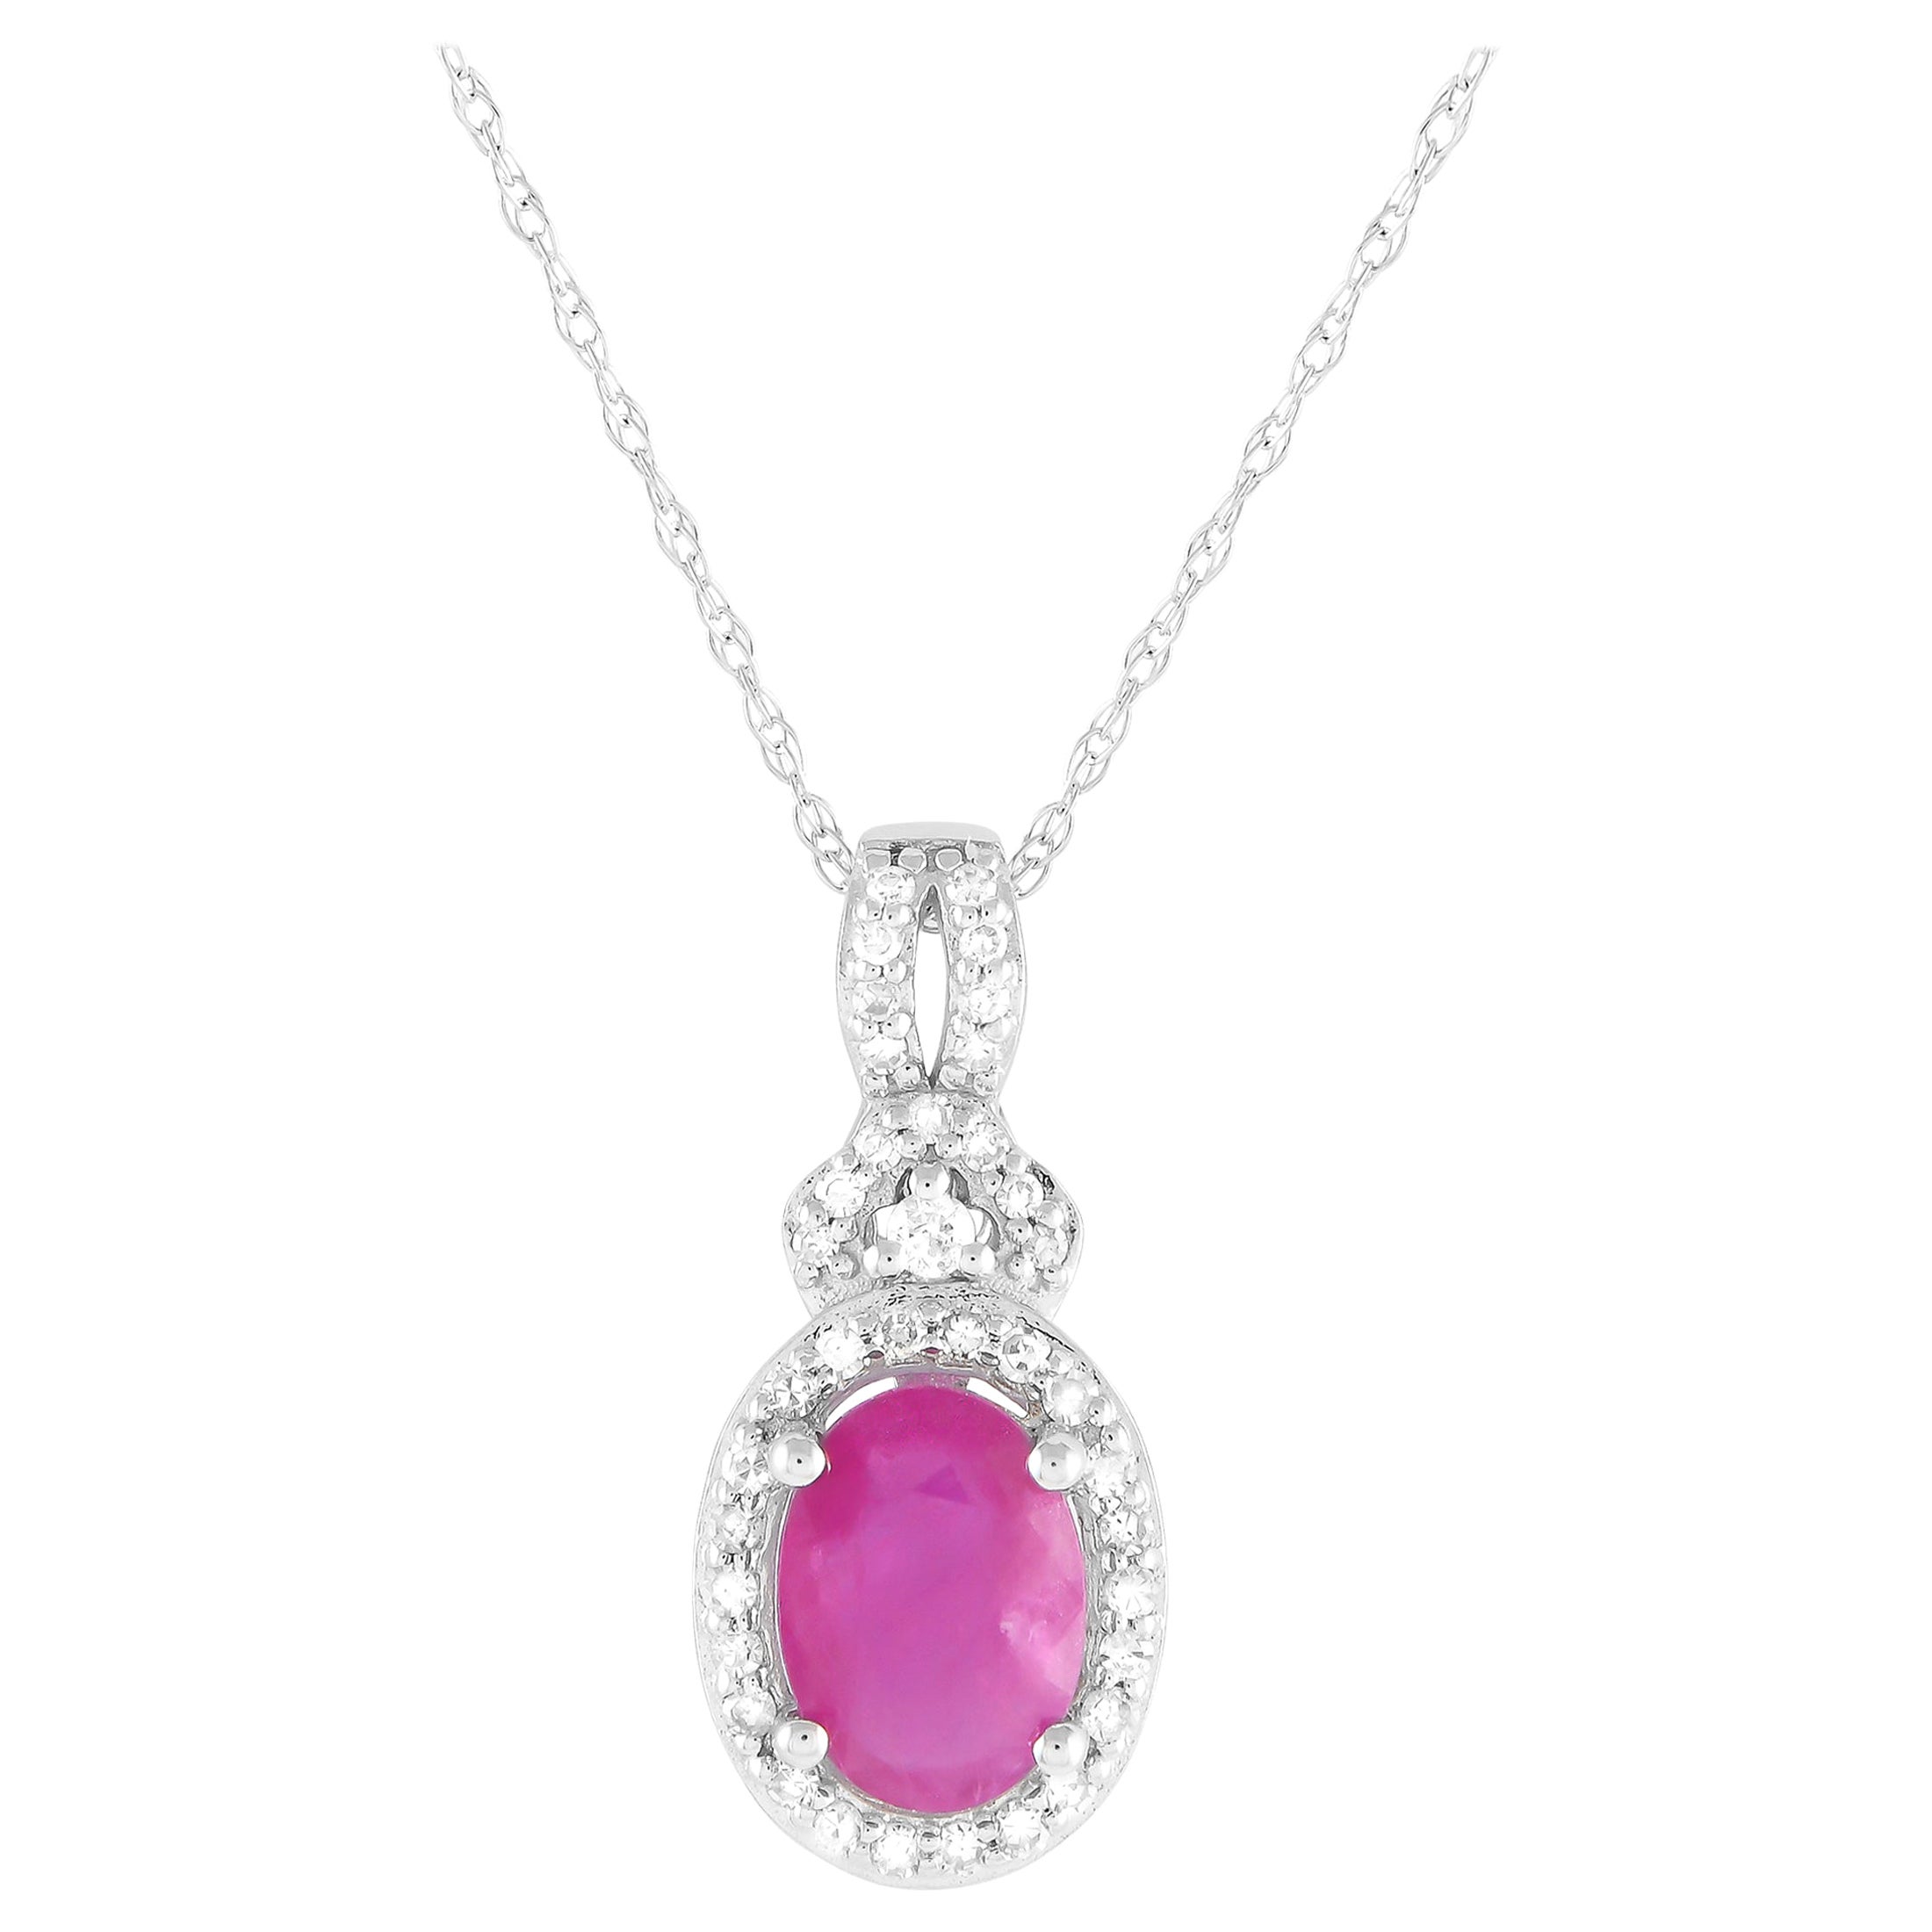 LB Exclusive 14K White Gold 0.15ct Diamond & Ruby Pendant Necklace PD4-15738WRU For Sale